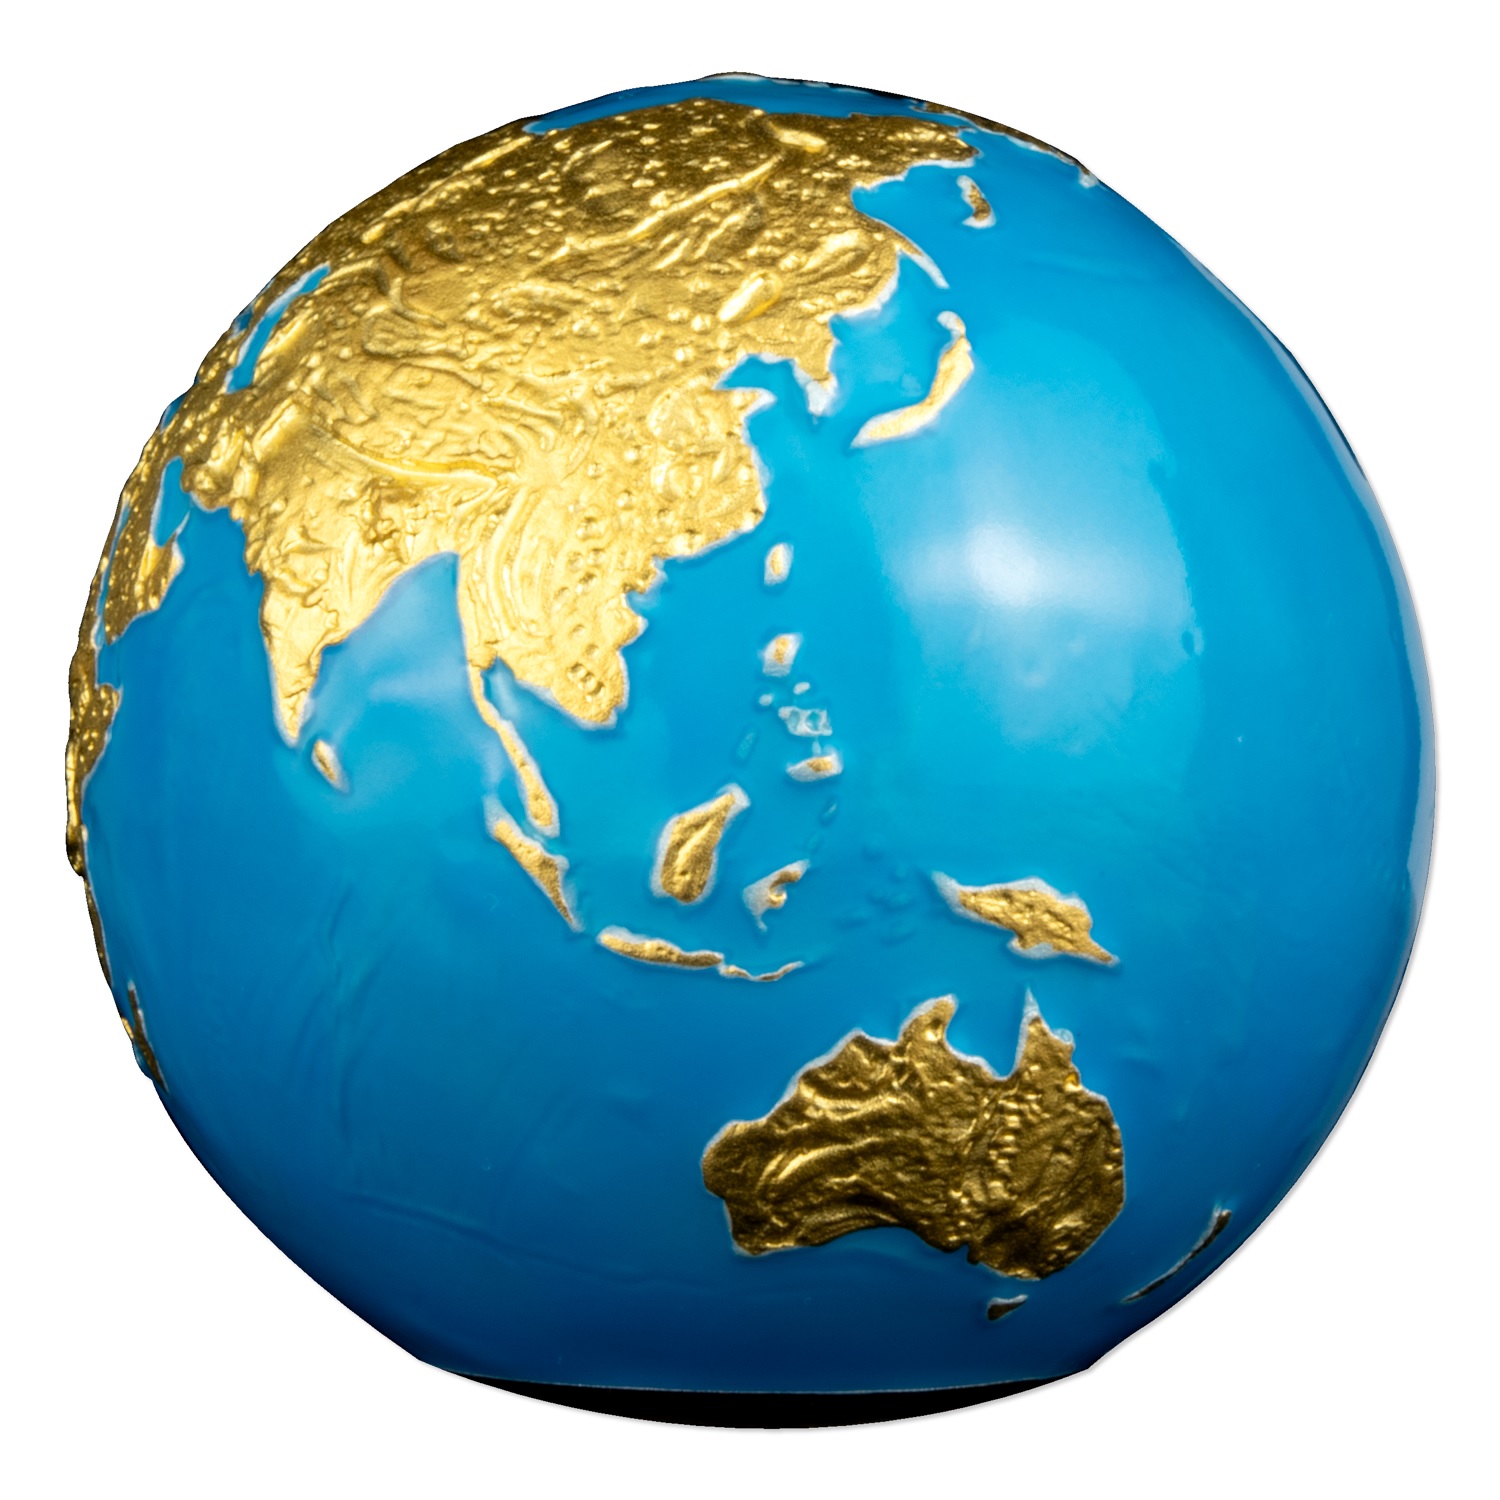 (W022.5.D.2023.3.oz.Ag.8) 5 $ Barbados 2023 3 oz BU silver - Glow-in-the-dark Blue Marble (gilded) (Asia and Oceania) (zoom)